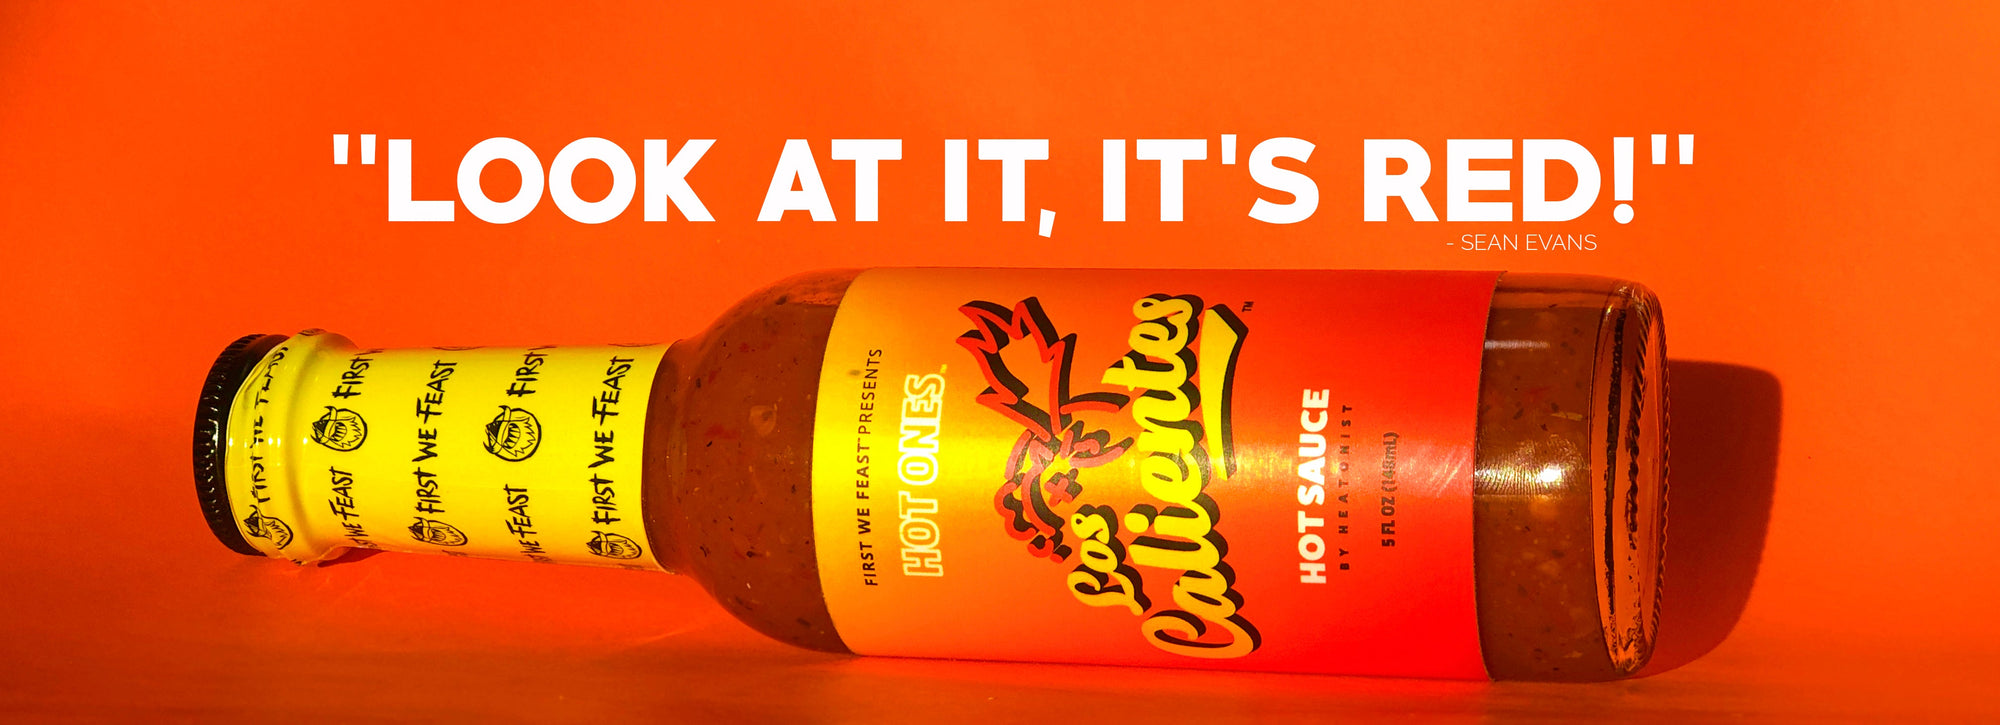 Looking For Fiery Chipotle?